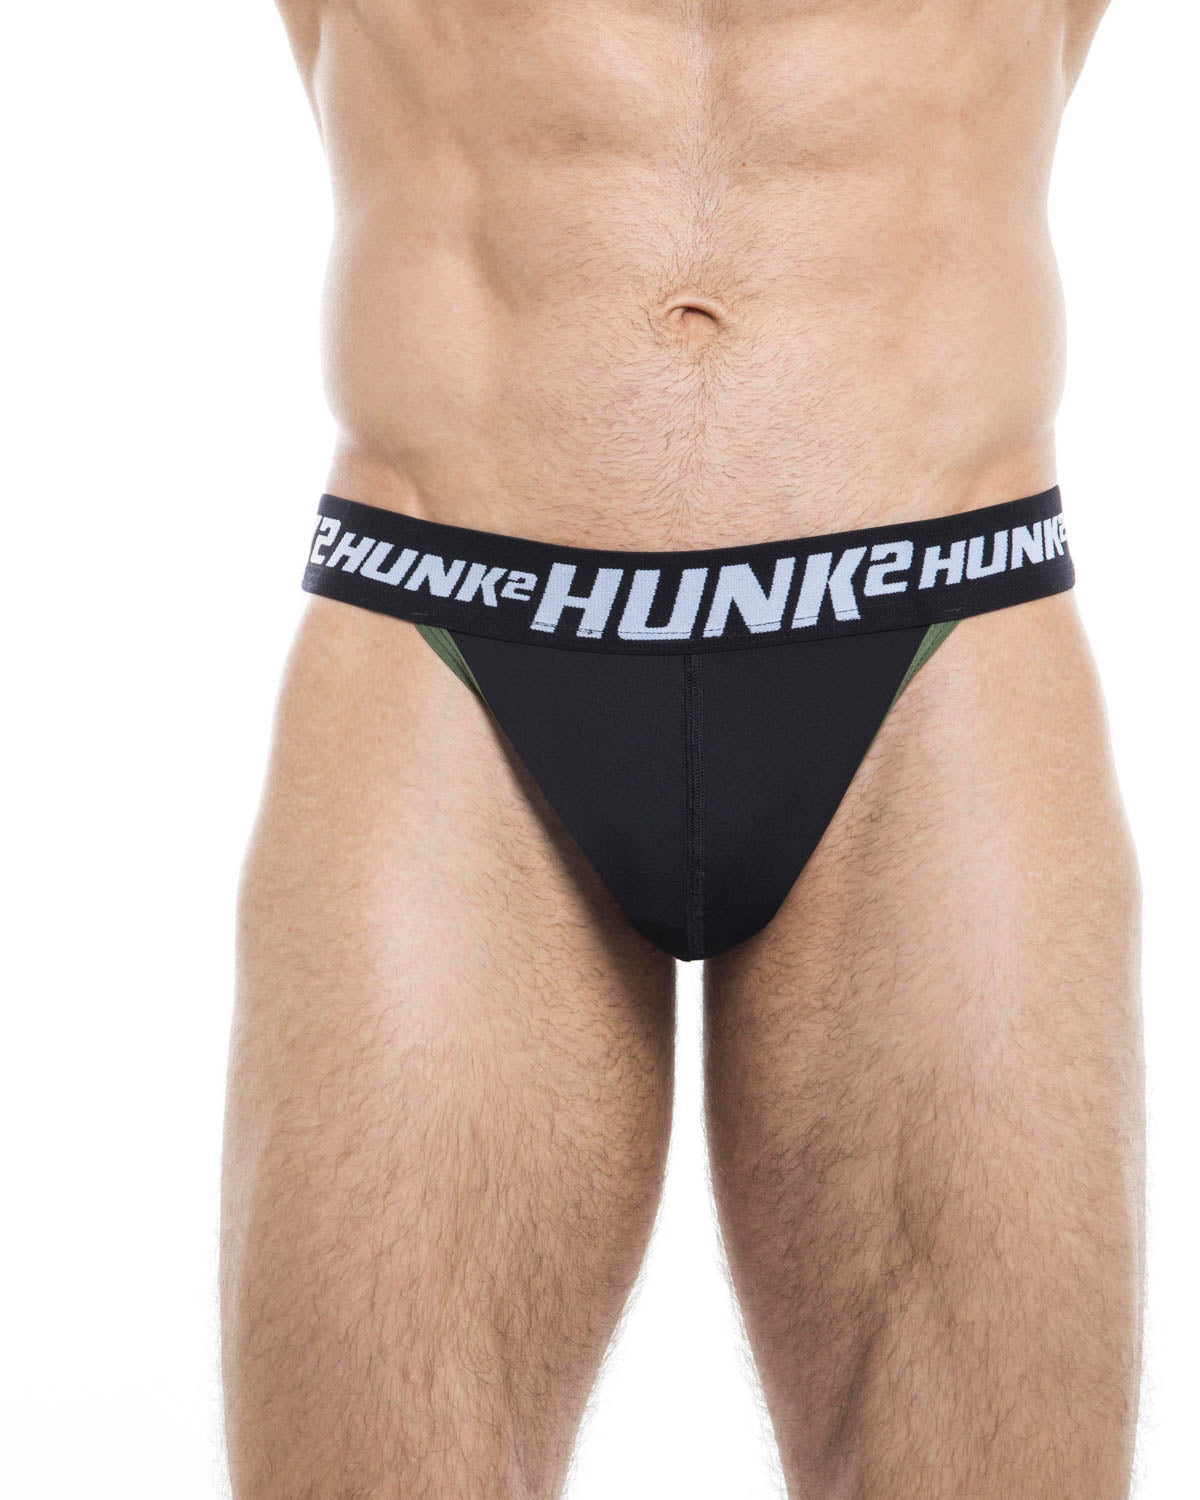 Men's thongs - HUNK2 Underwear Chaos Lusso Thongs available at MensUnderwear.io - Image 1